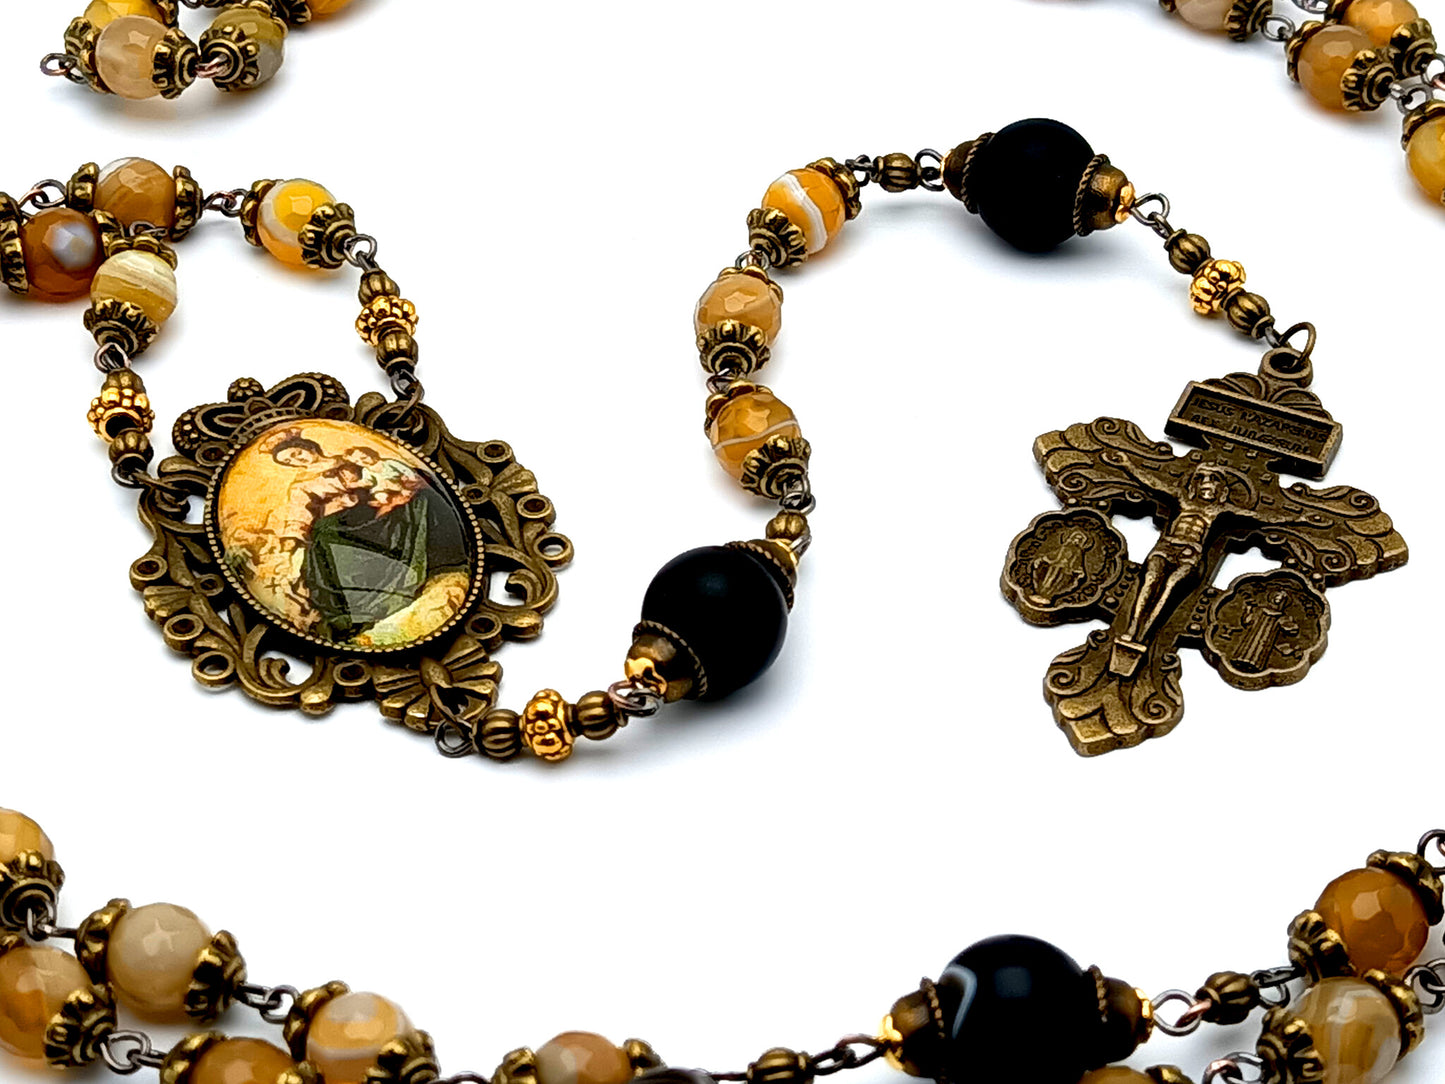 Vintage style Our Lady of Mount Carmel unique rosary beads with faceted agate and onyx gemstone beads with Miraculous medal and Saint Benedict brass crucifix.